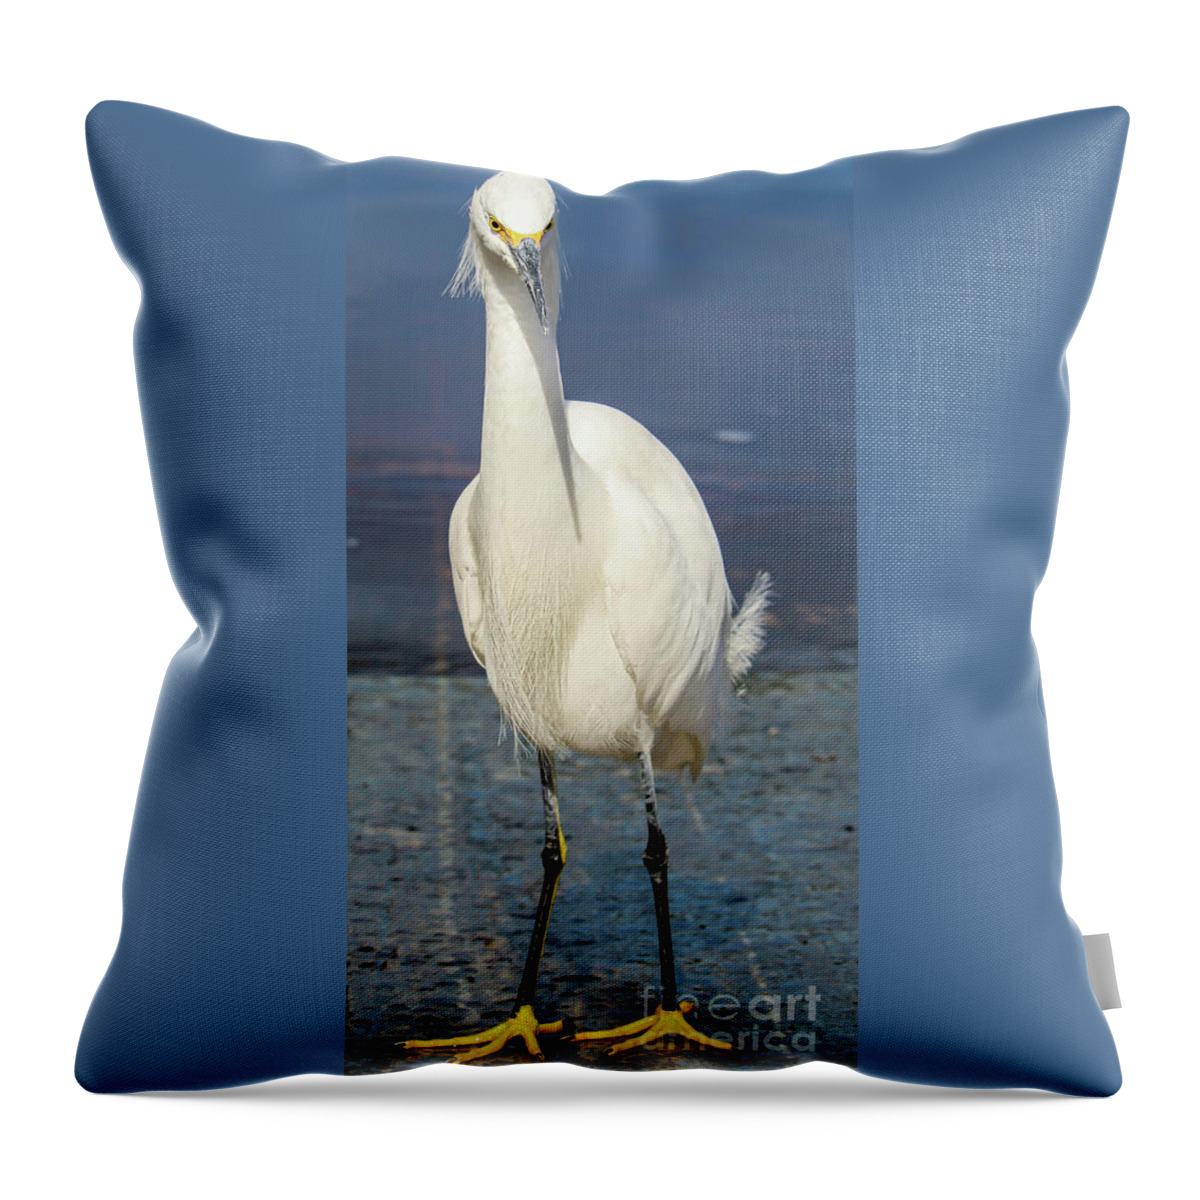 Snowy Egret Throw Pillow featuring the photograph Feathered Friend by Joanne Carey